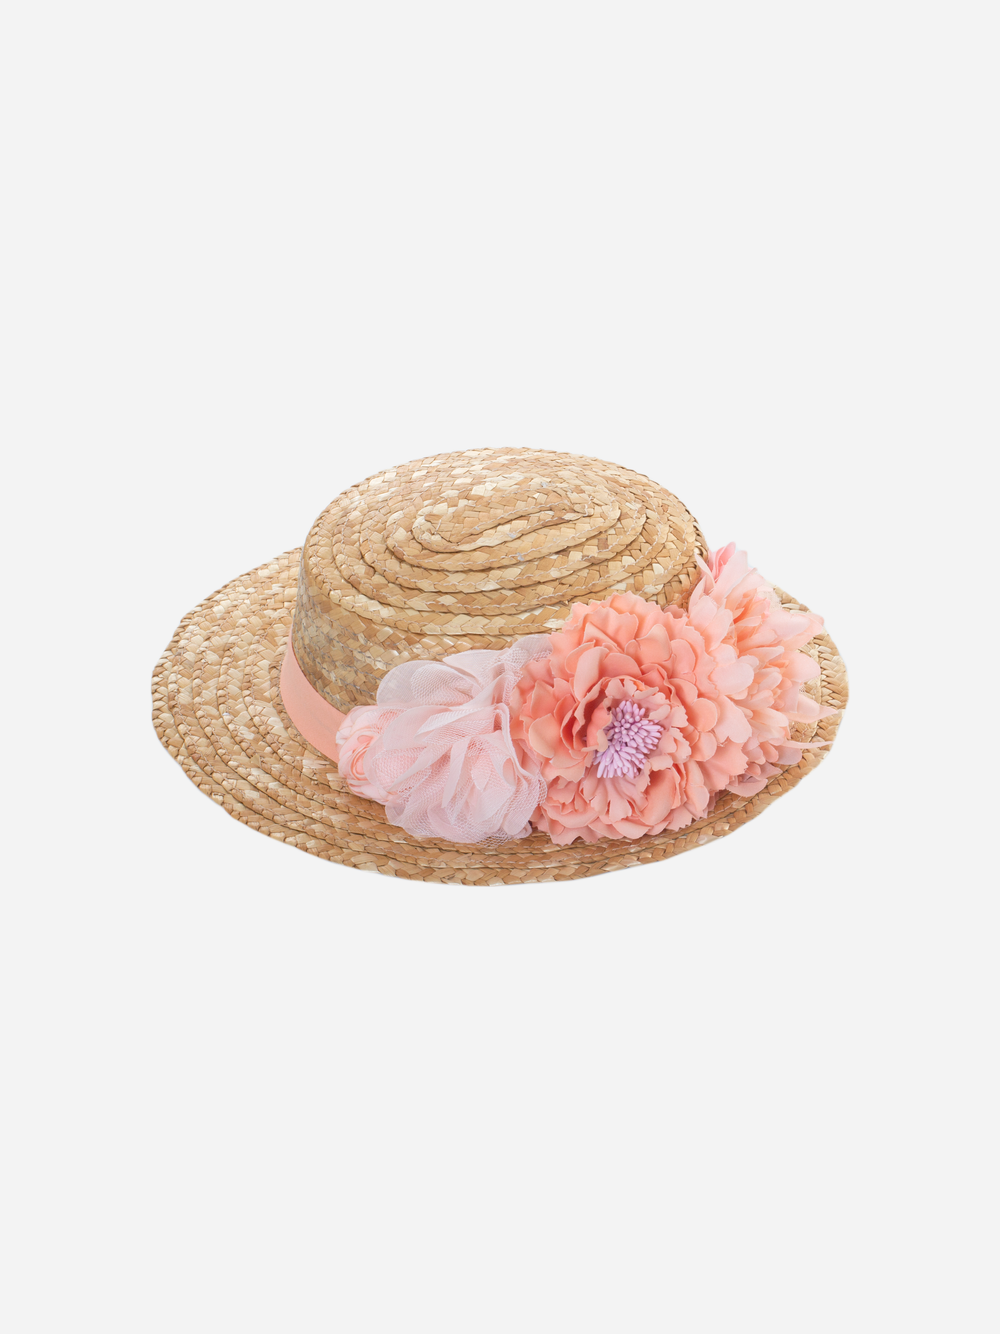 Girls straw hat decorated with flowers